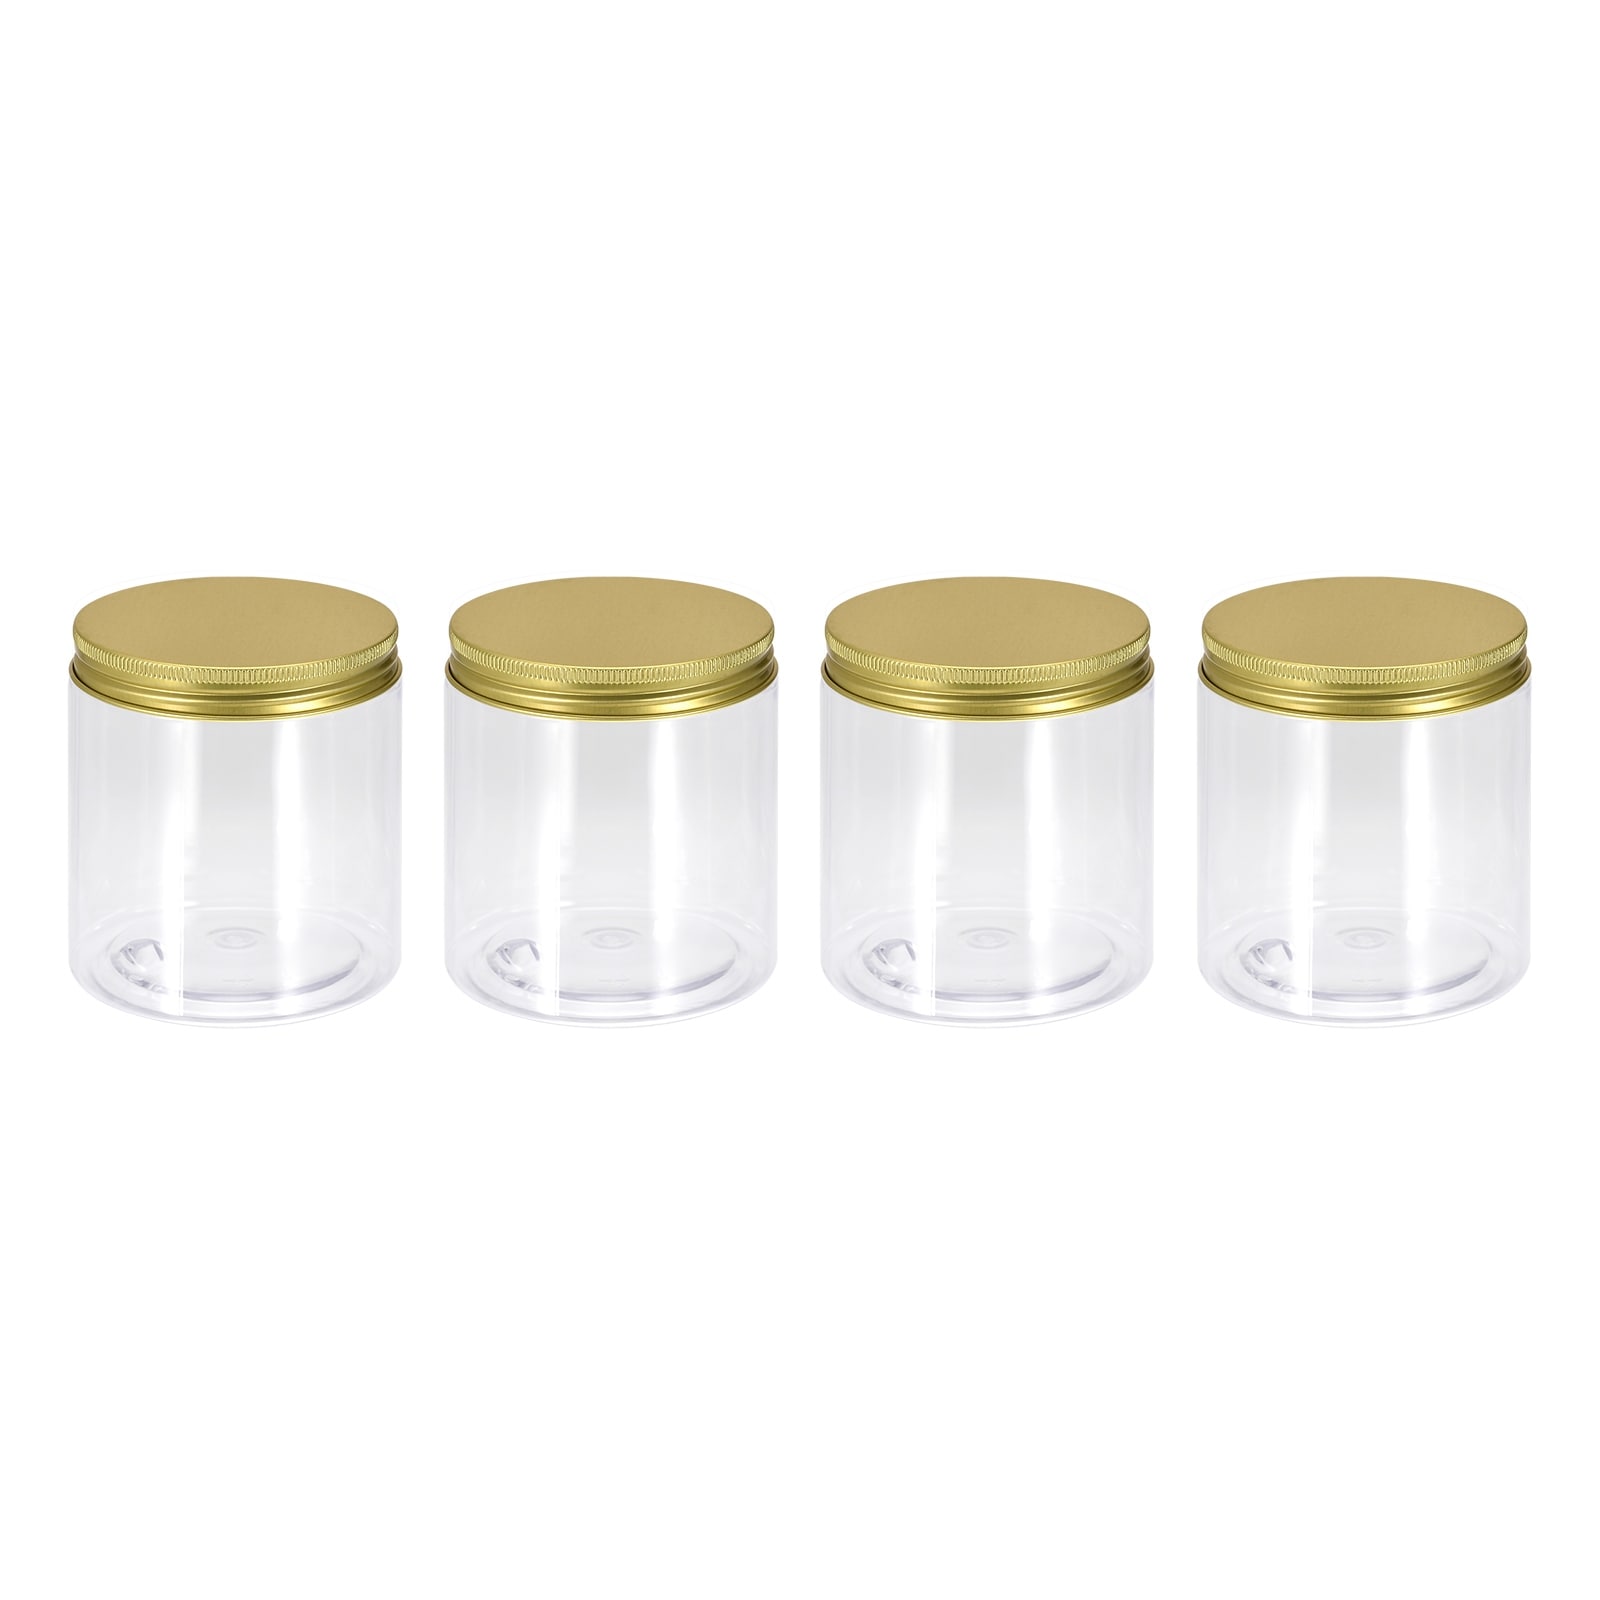 https://ak1.ostkcdn.com/images/products/is/images/direct/e459dbdba950e2864148e72c584ebc29a6e194bb/4Pcs-250ml-Clear-Plastic-Jars-with-Gold-Lid-Food-Storage-Containers-for-Kitchen.jpg